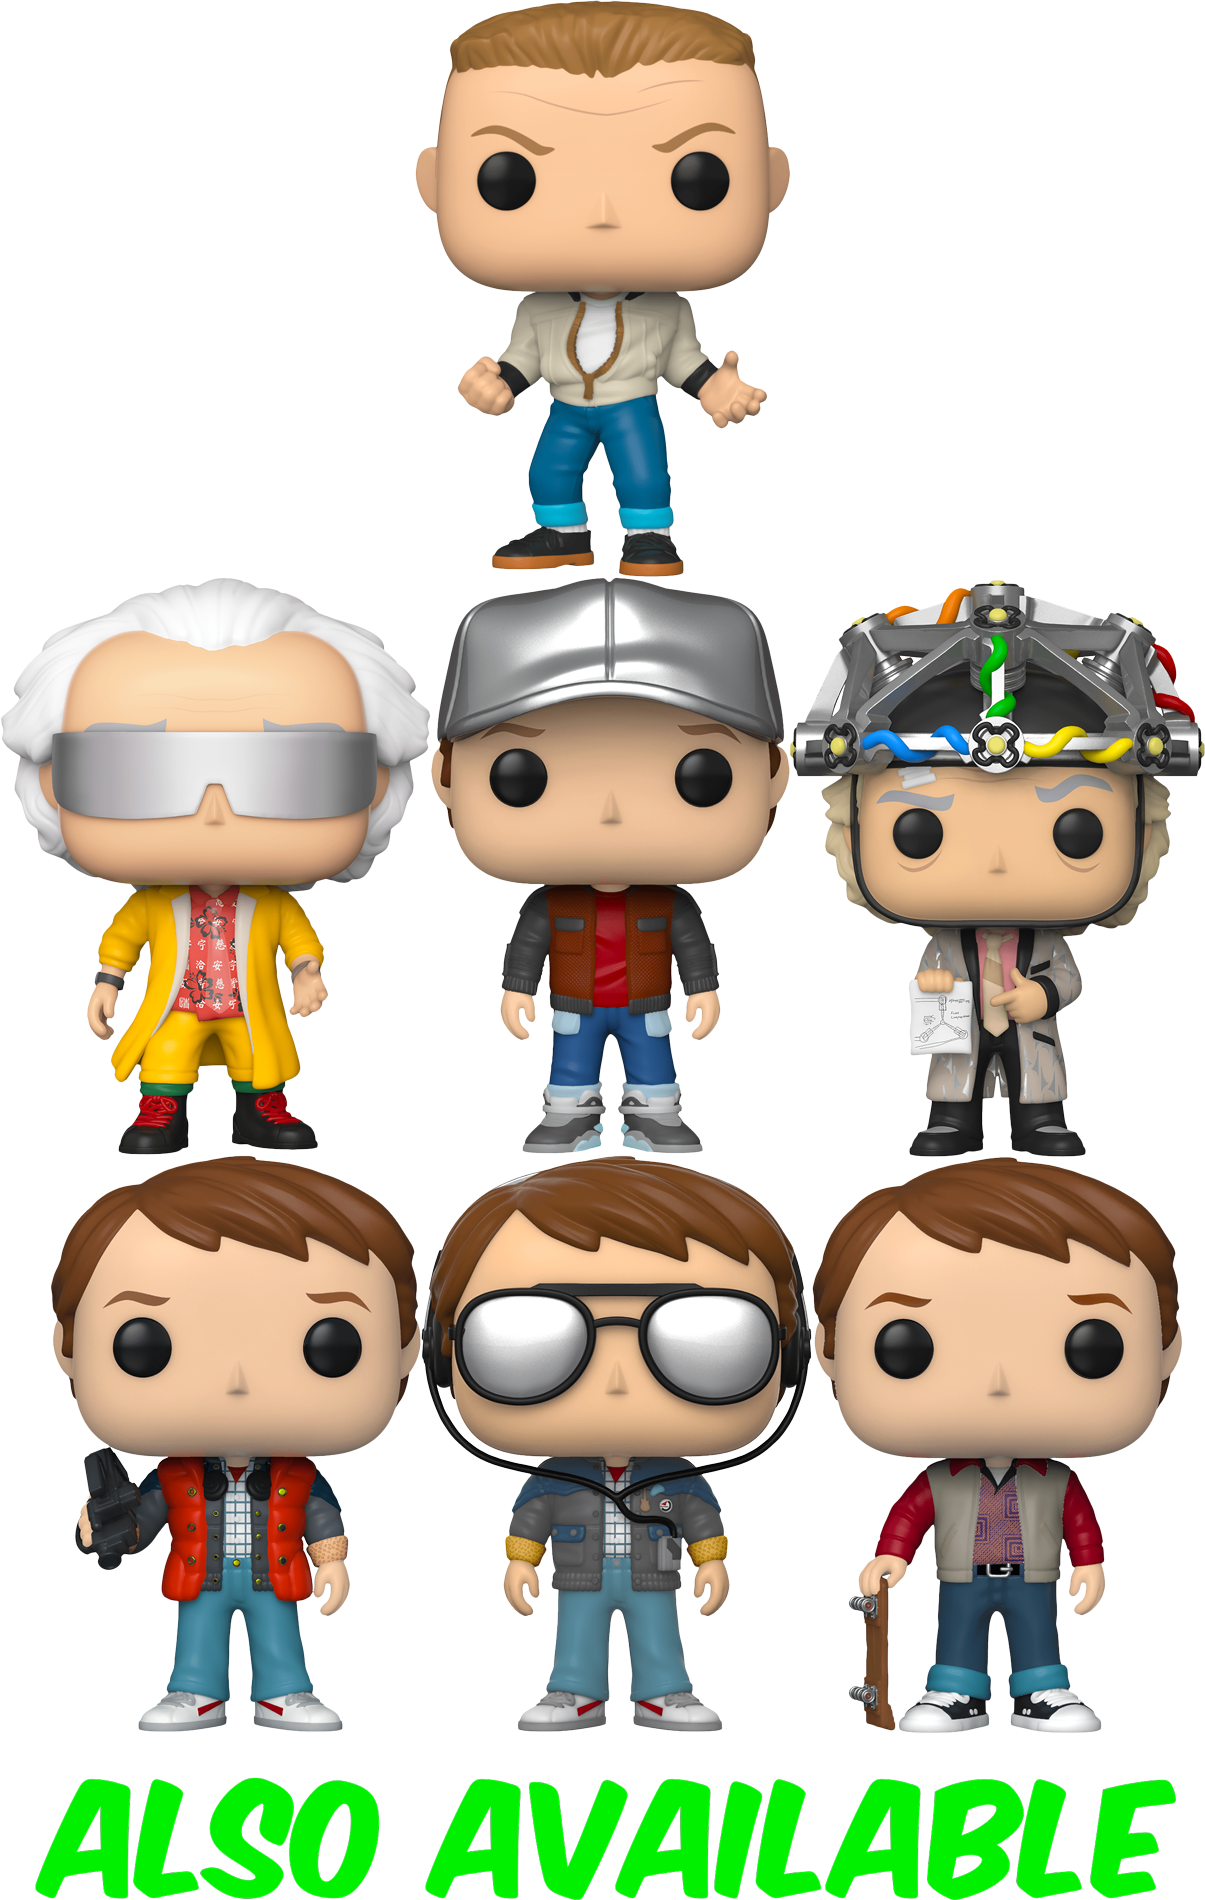 Funko Pop! Back To The Future - Marty McFly with Video Camera #961